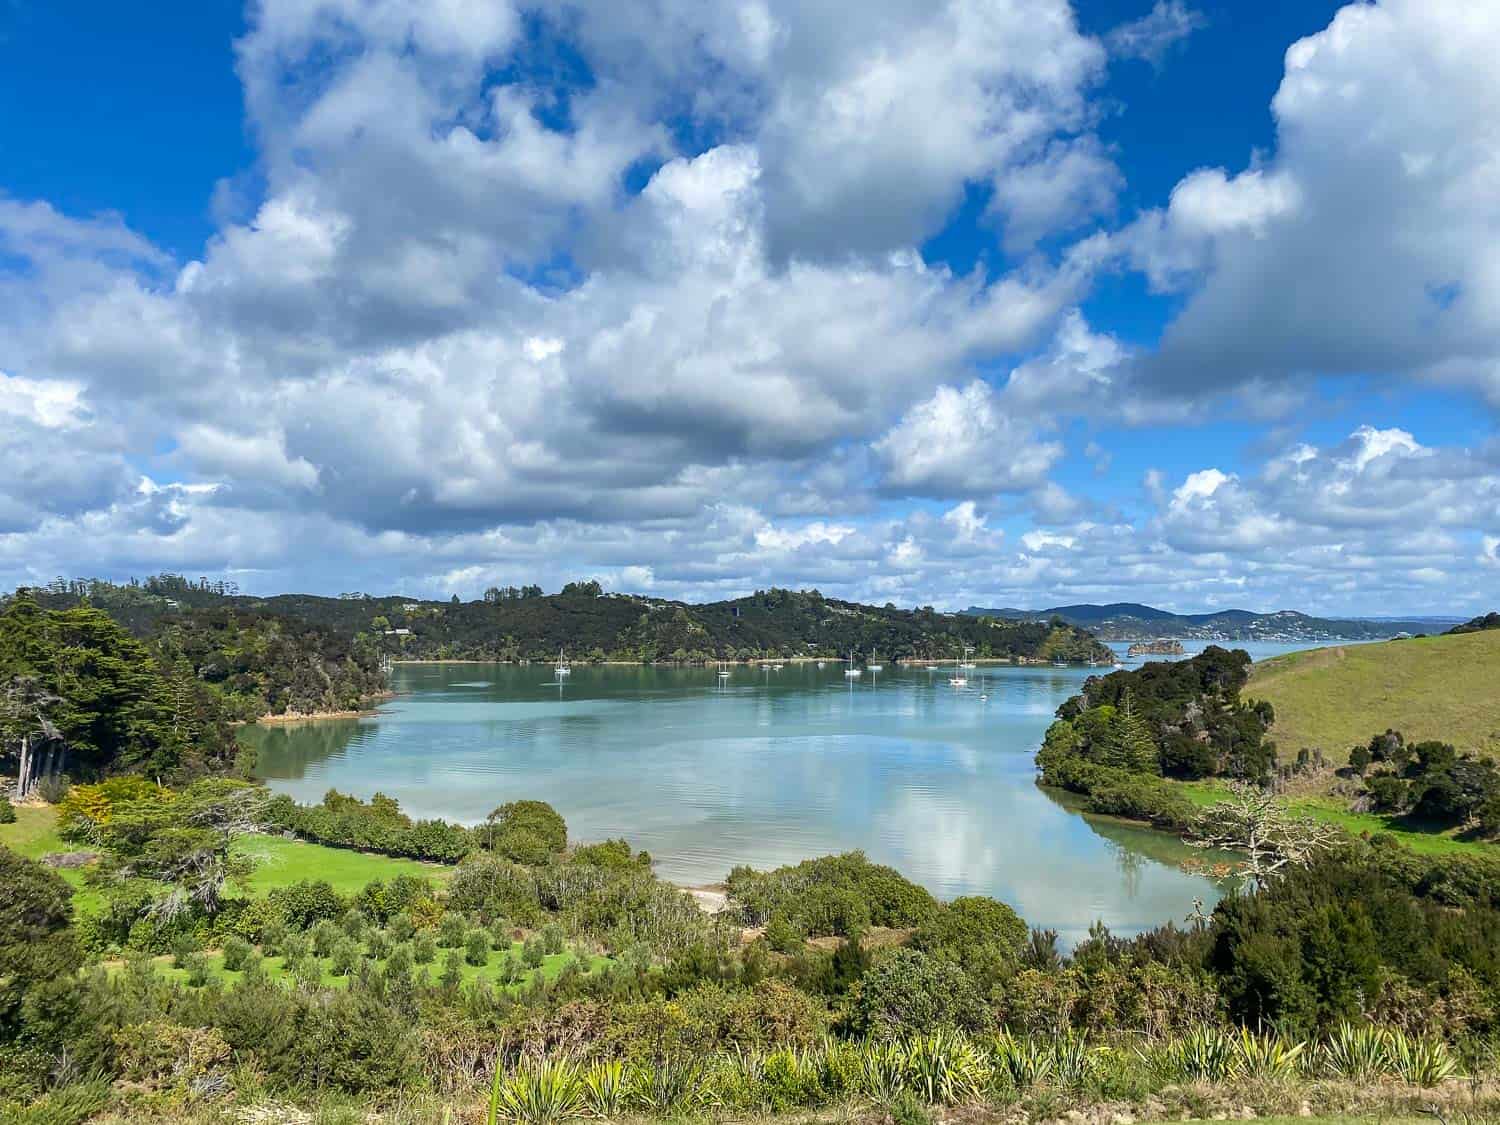 View from our Airbnb in Bay of Islands, New Zealand